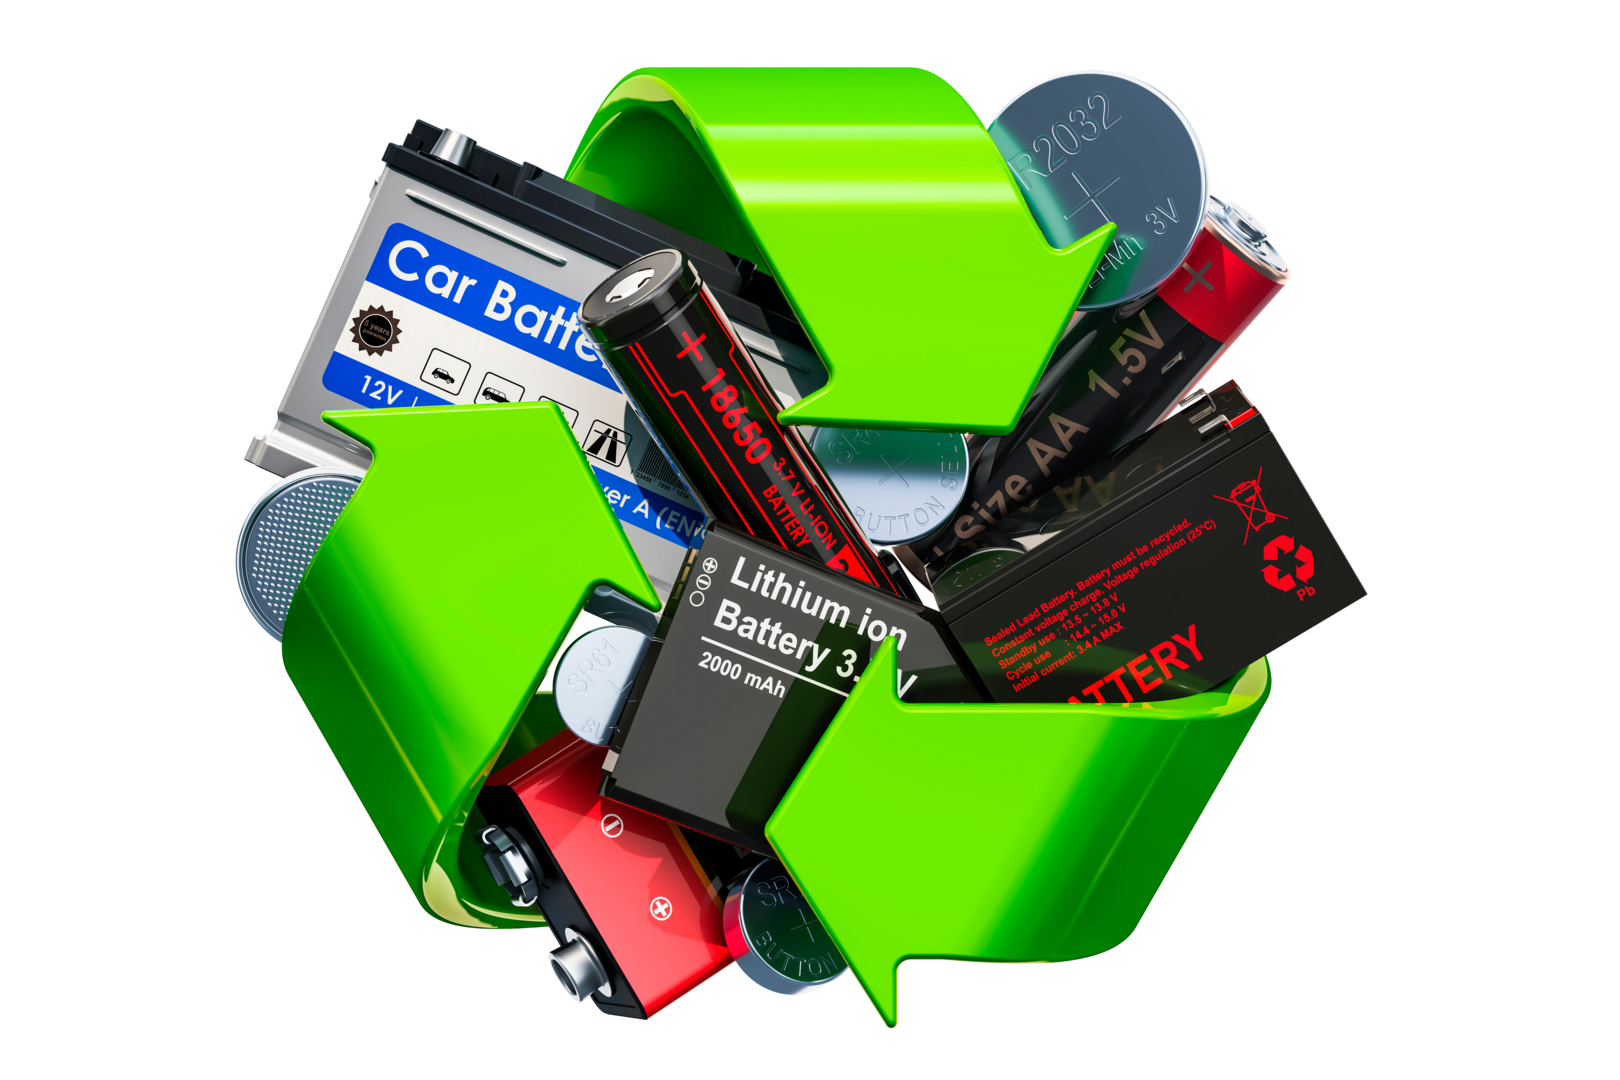 ZEUS Recycled 153,133lbs of batteries... and Counting! Zeus Battery